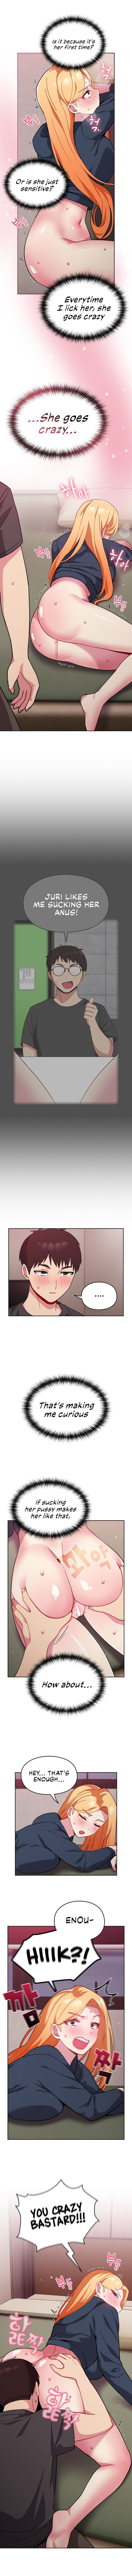 when-did-we-start-dating-chap-34-7